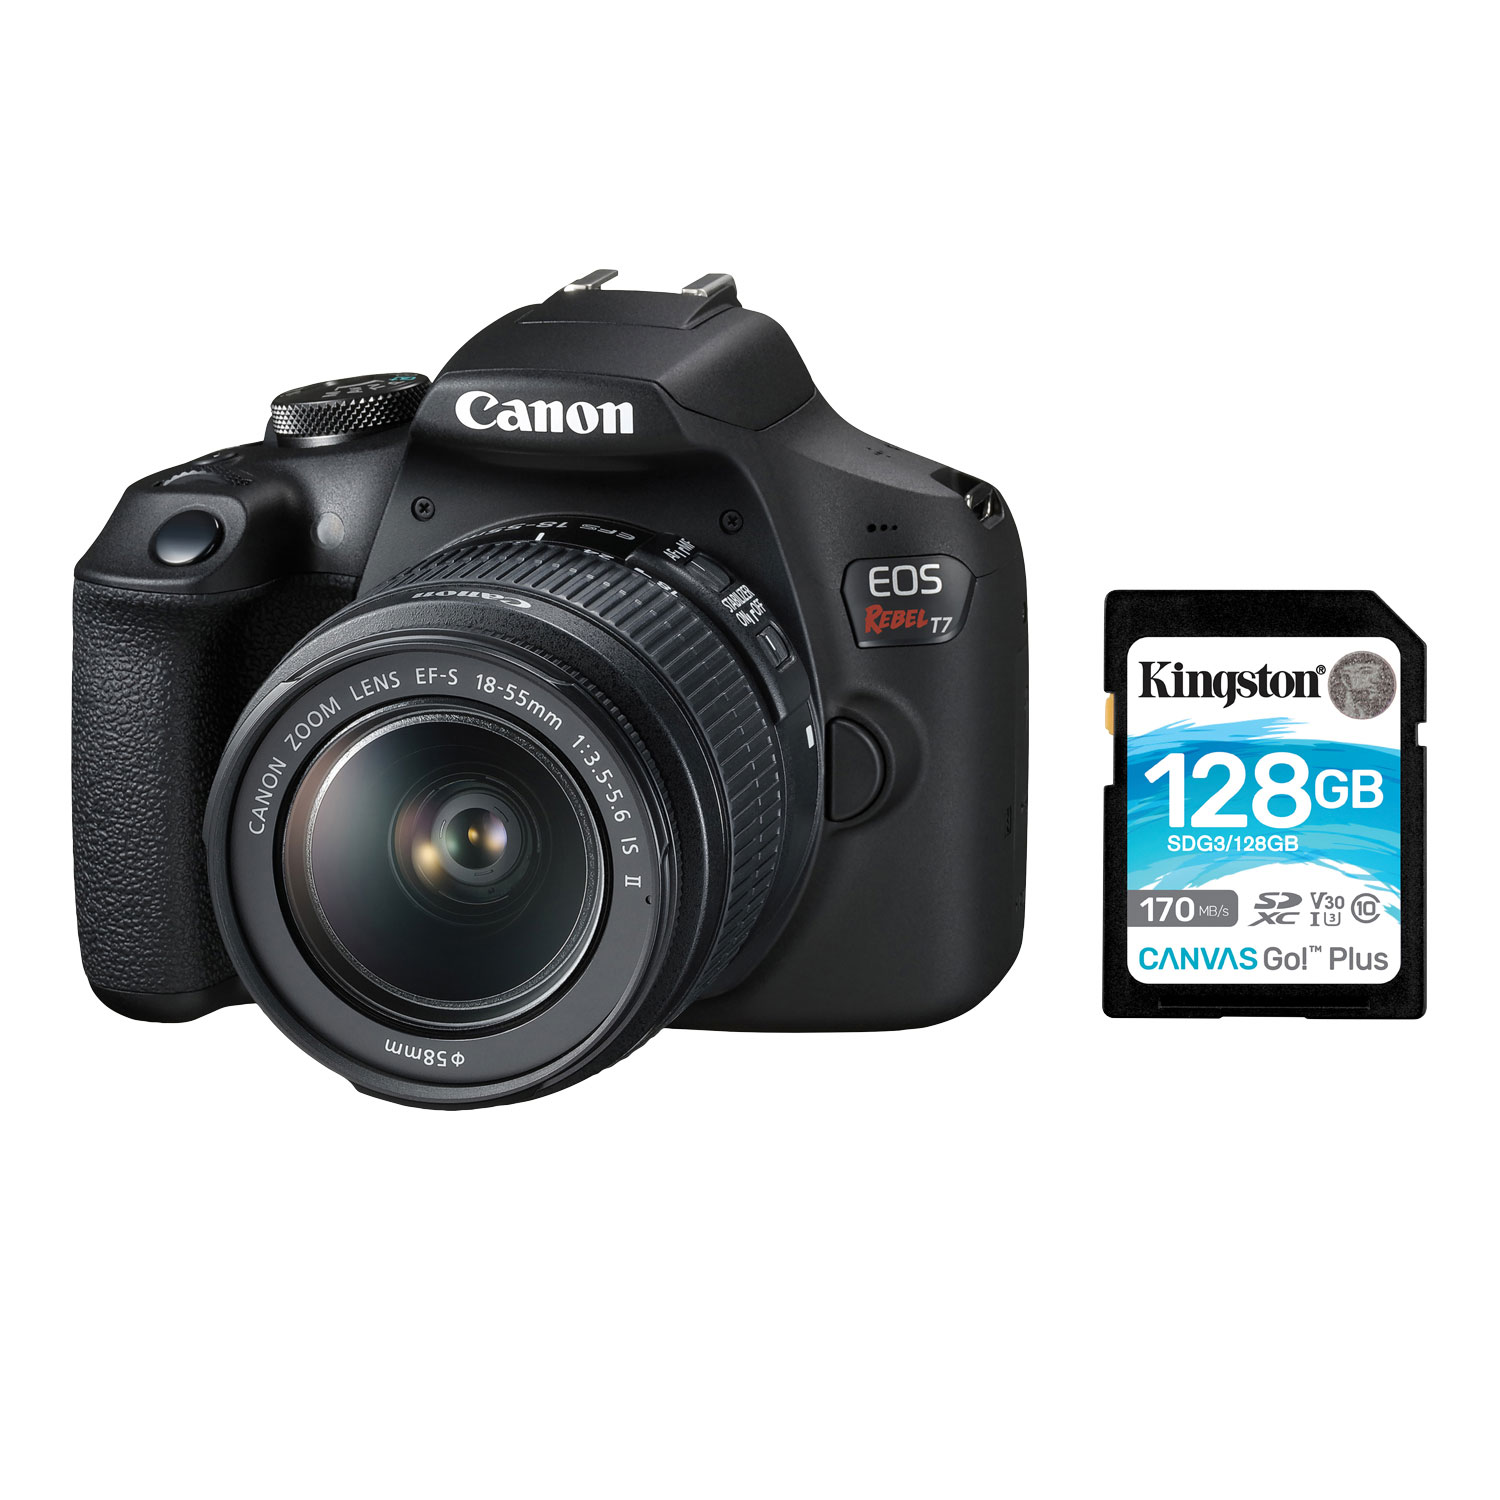 Canon EOS Rebel T7 DSLR Camera w/ 18-55mm IS Lens Kit & 128GB 170MB/s SDXC Memory Card